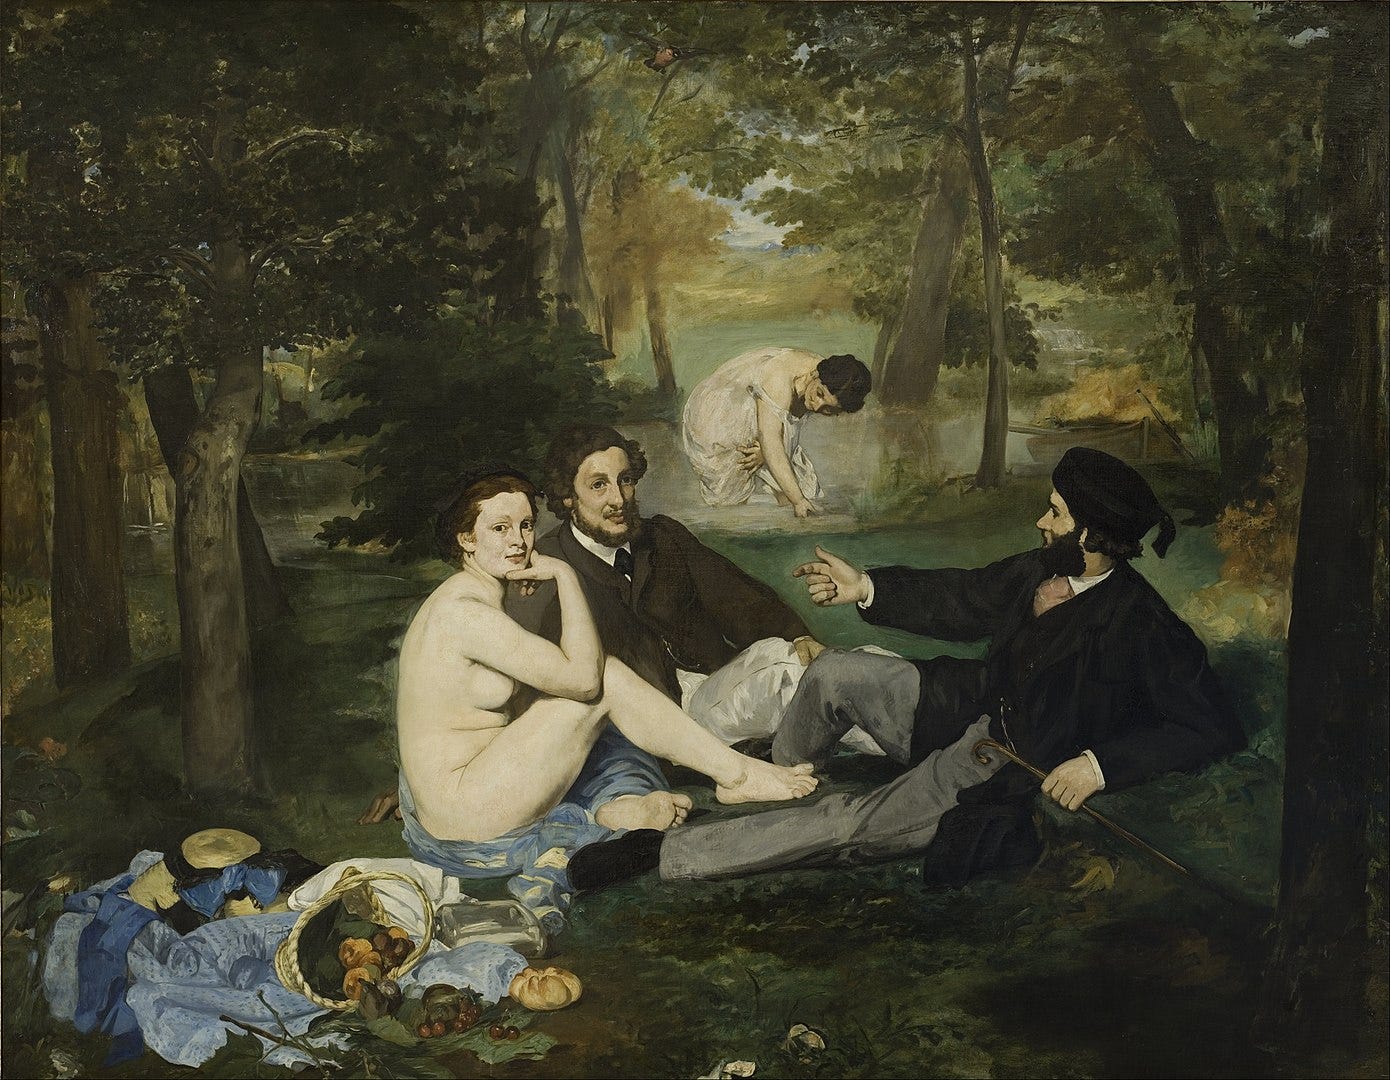 four people picnicking in the woods, including a woman in a chemise bathing in a stream and, seated together, a nude woman and two men wearing suits